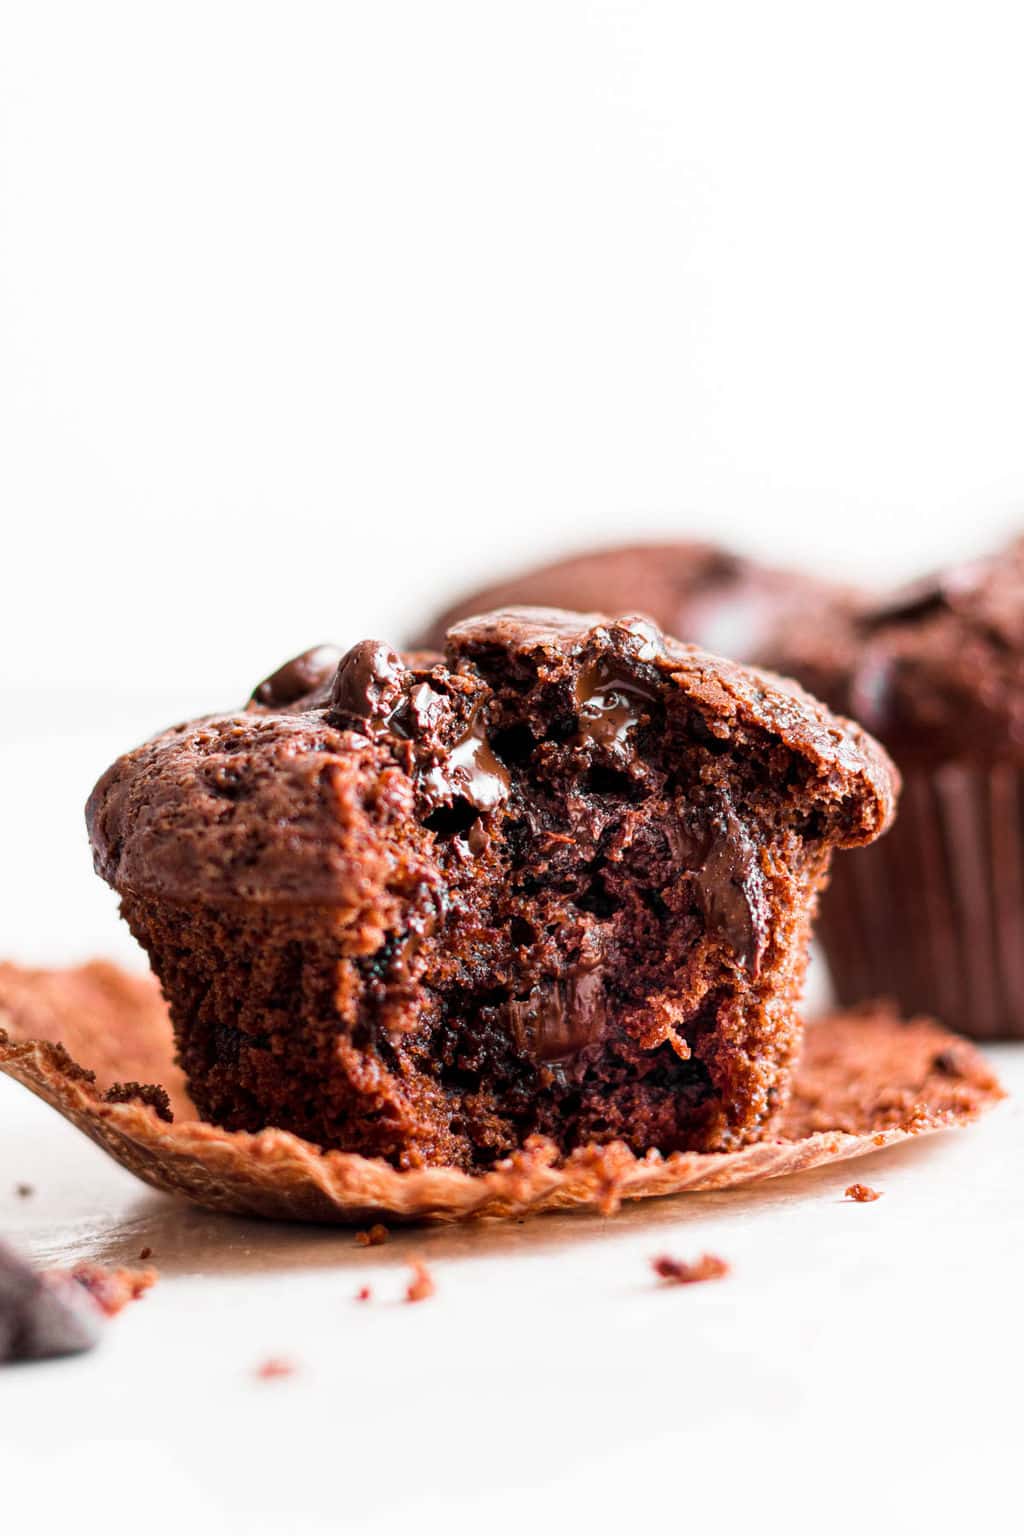 close up on a chocolate muffin with a bite out of it.